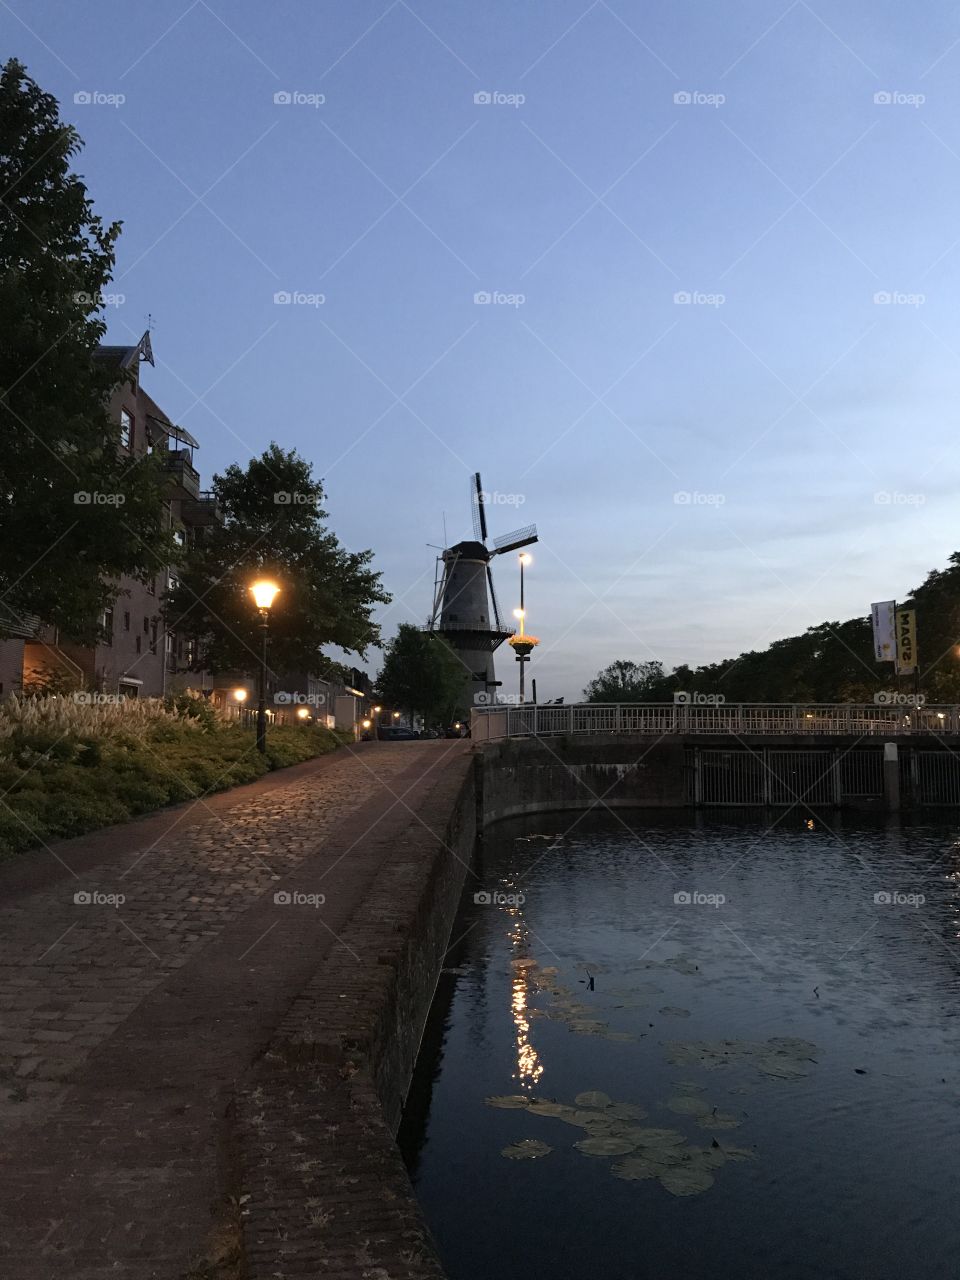 Windmill 
Dusk
Canal 
Evening 
Old